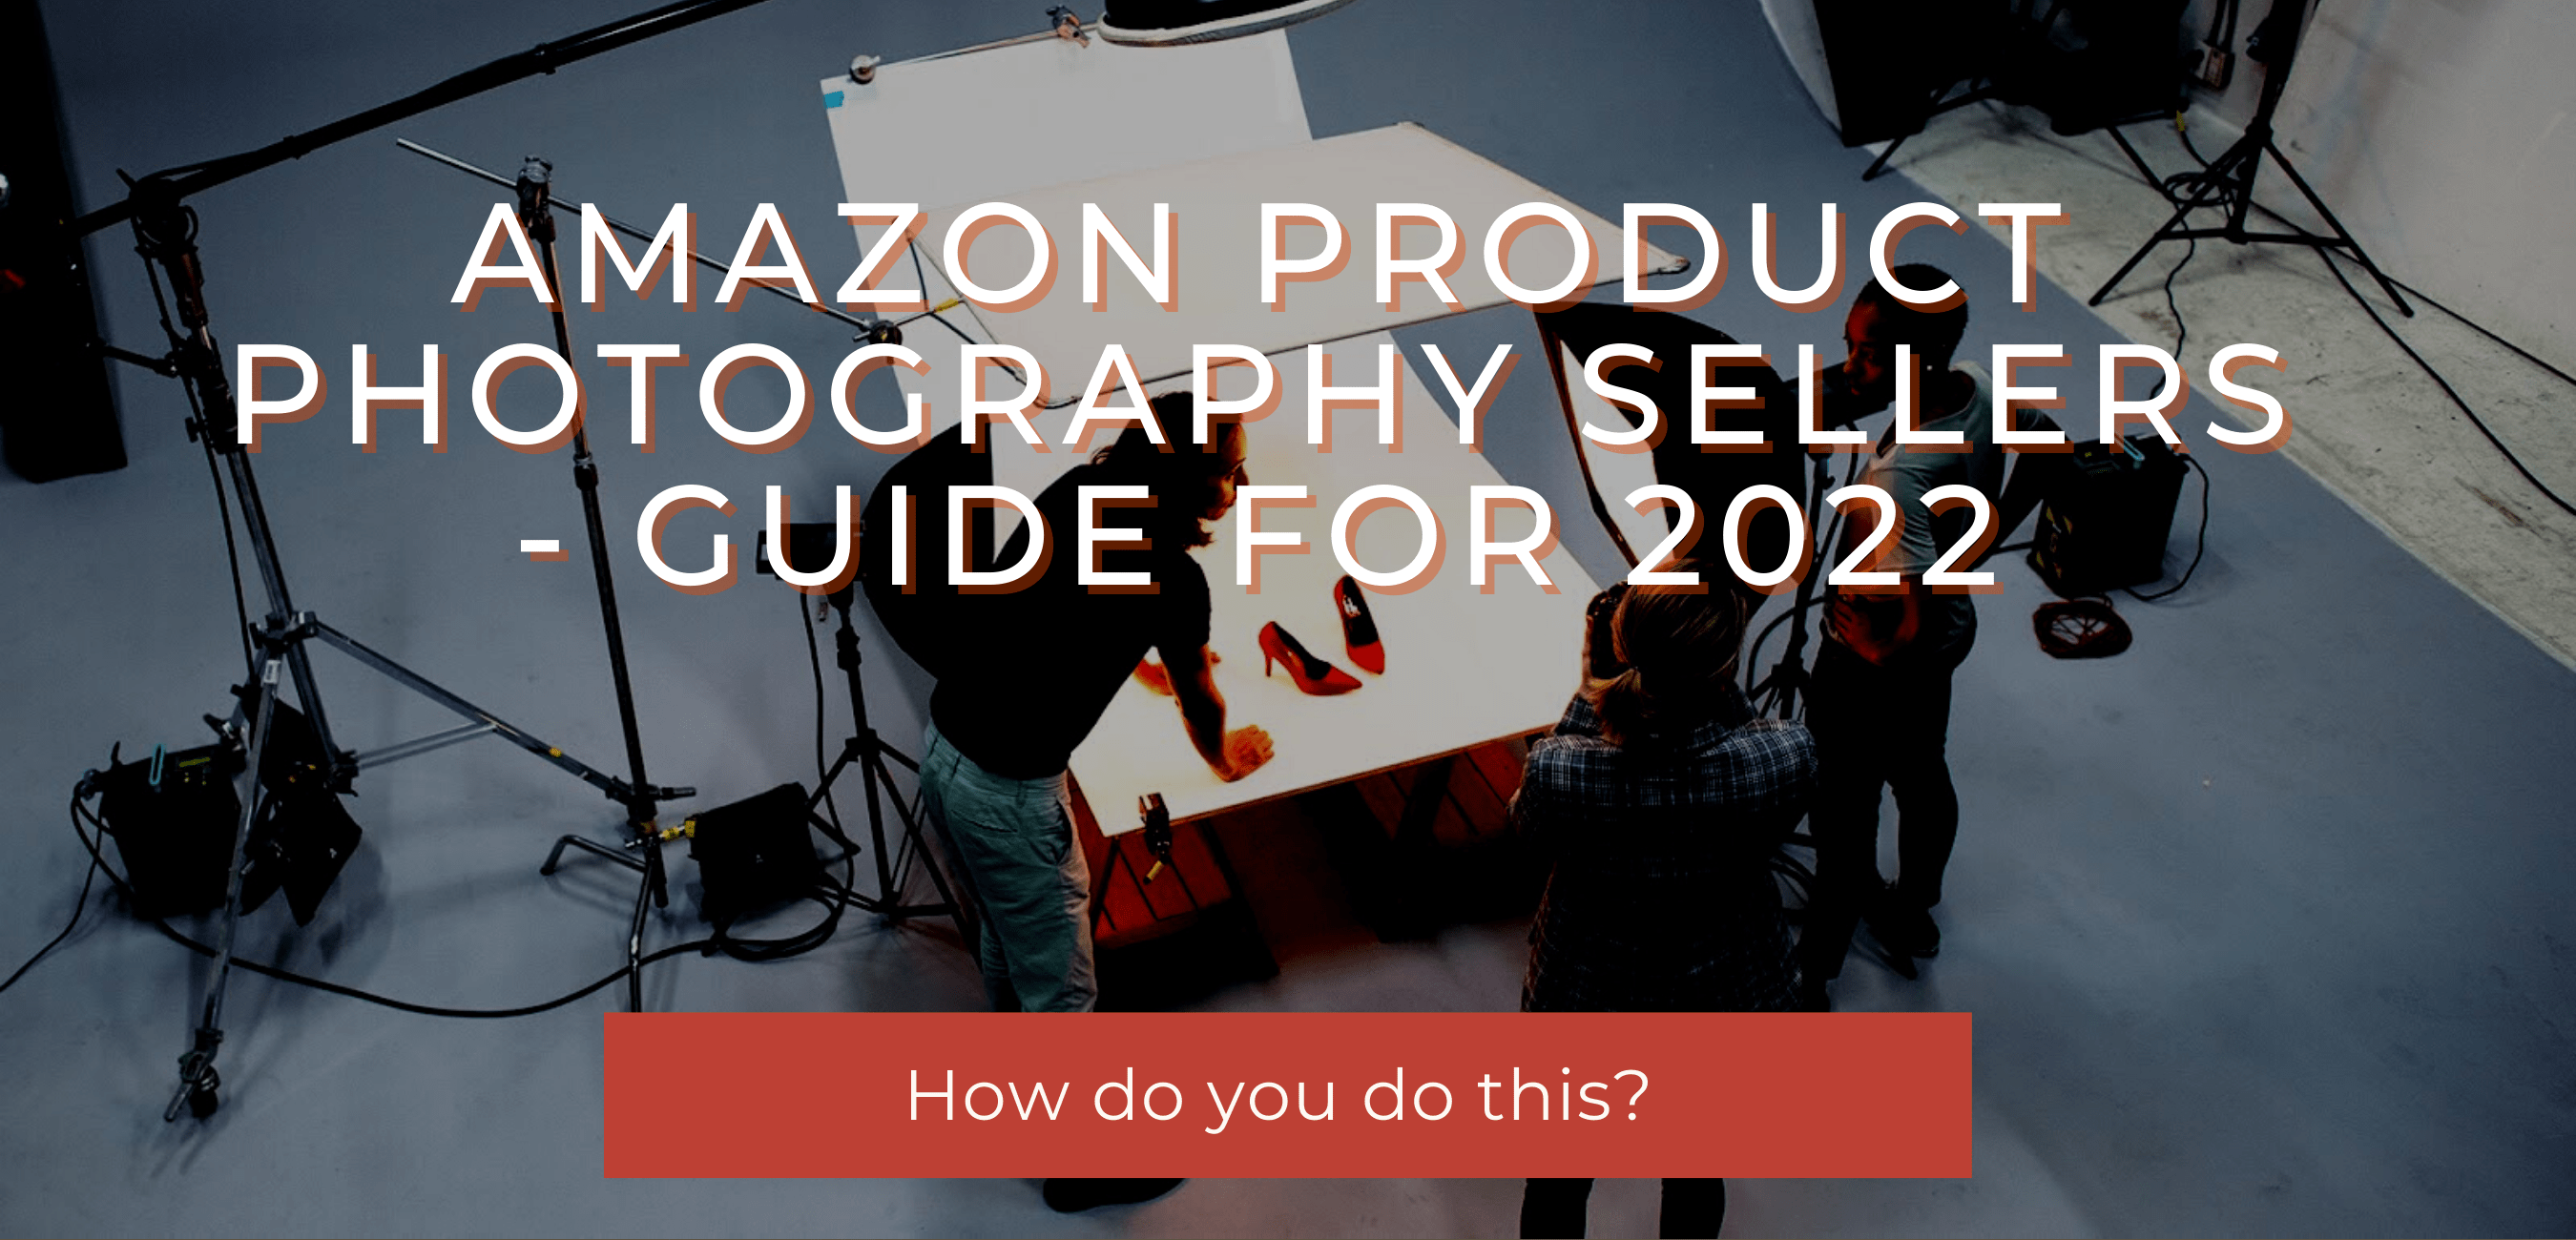 Amazon Product Photography Sellers - Guide for 2022